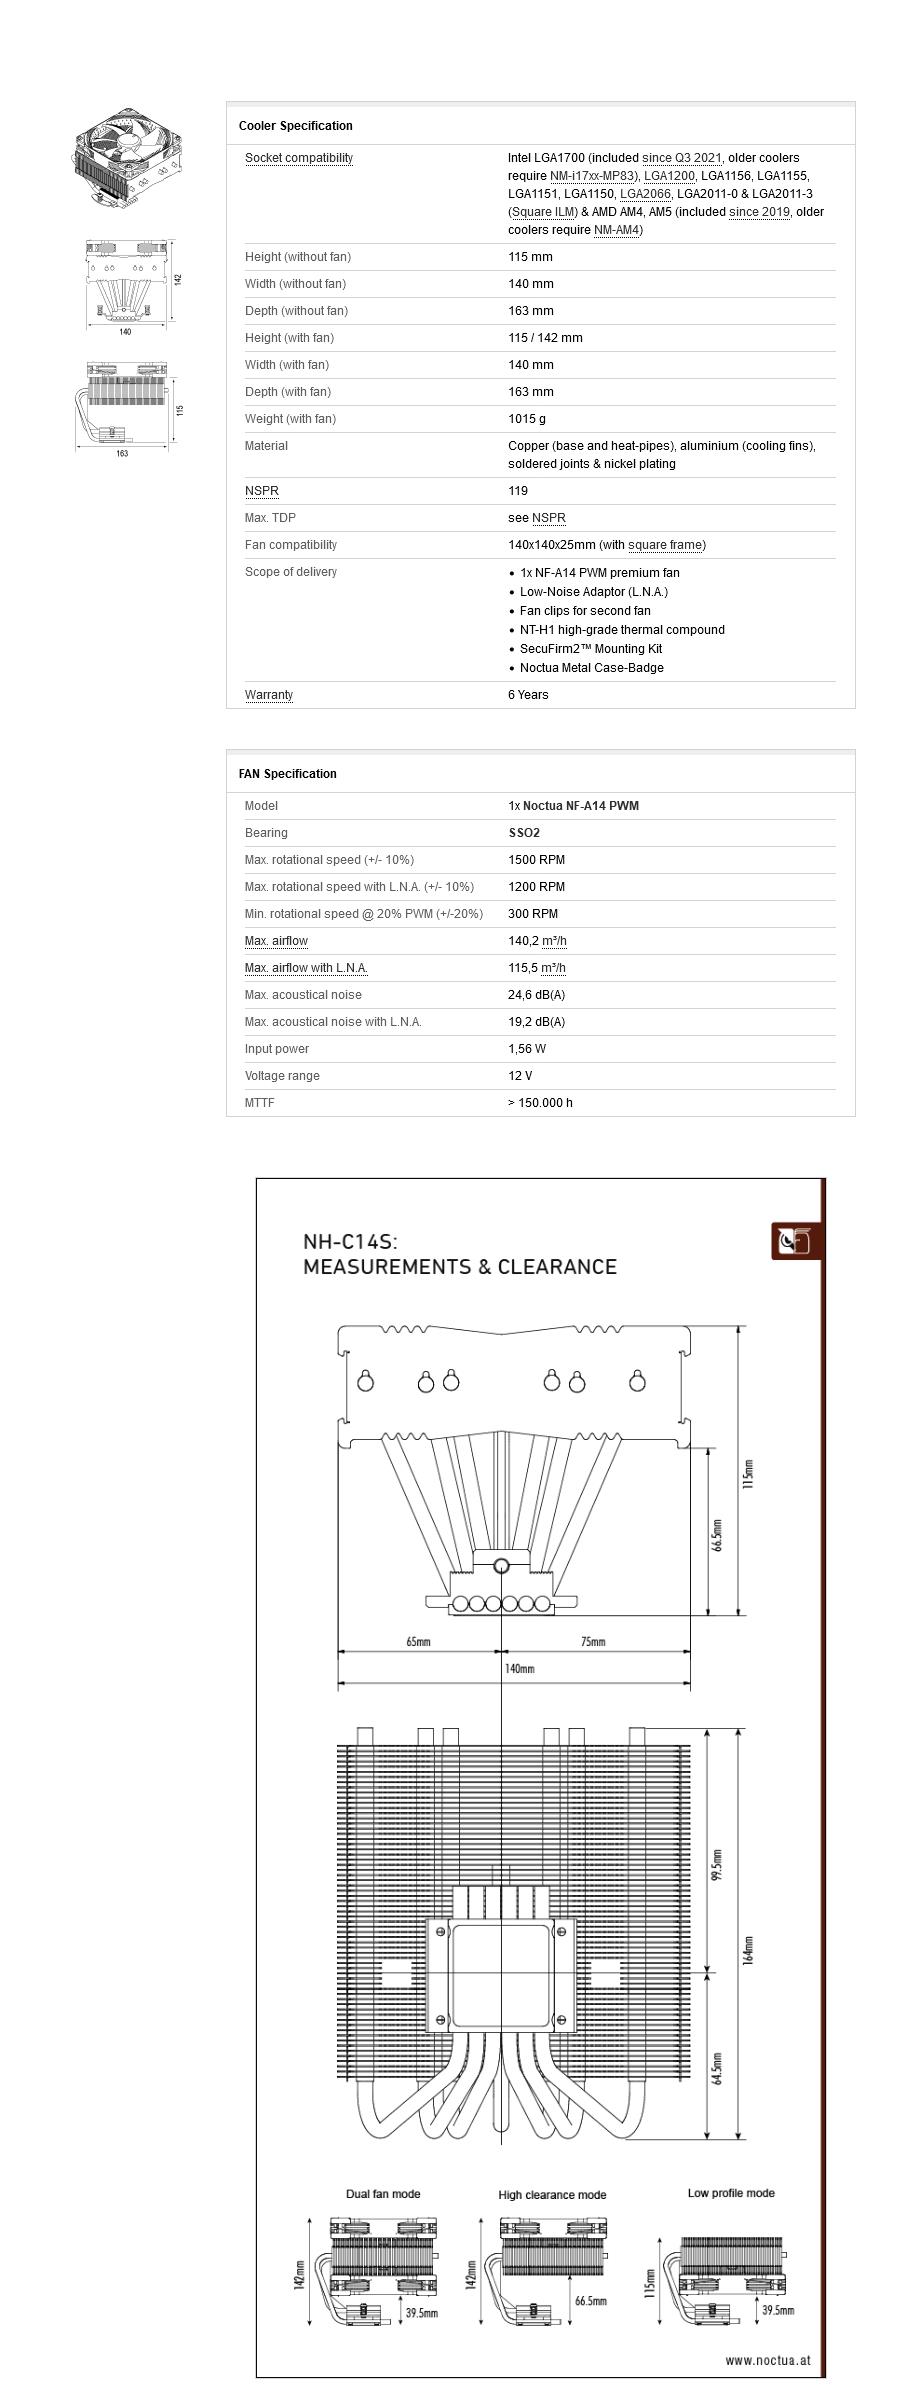 A large marketing image providing additional information about the product Noctua NH-C14S - Low Profile Multi-Socket CPU Cooler - Additional alt info not provided